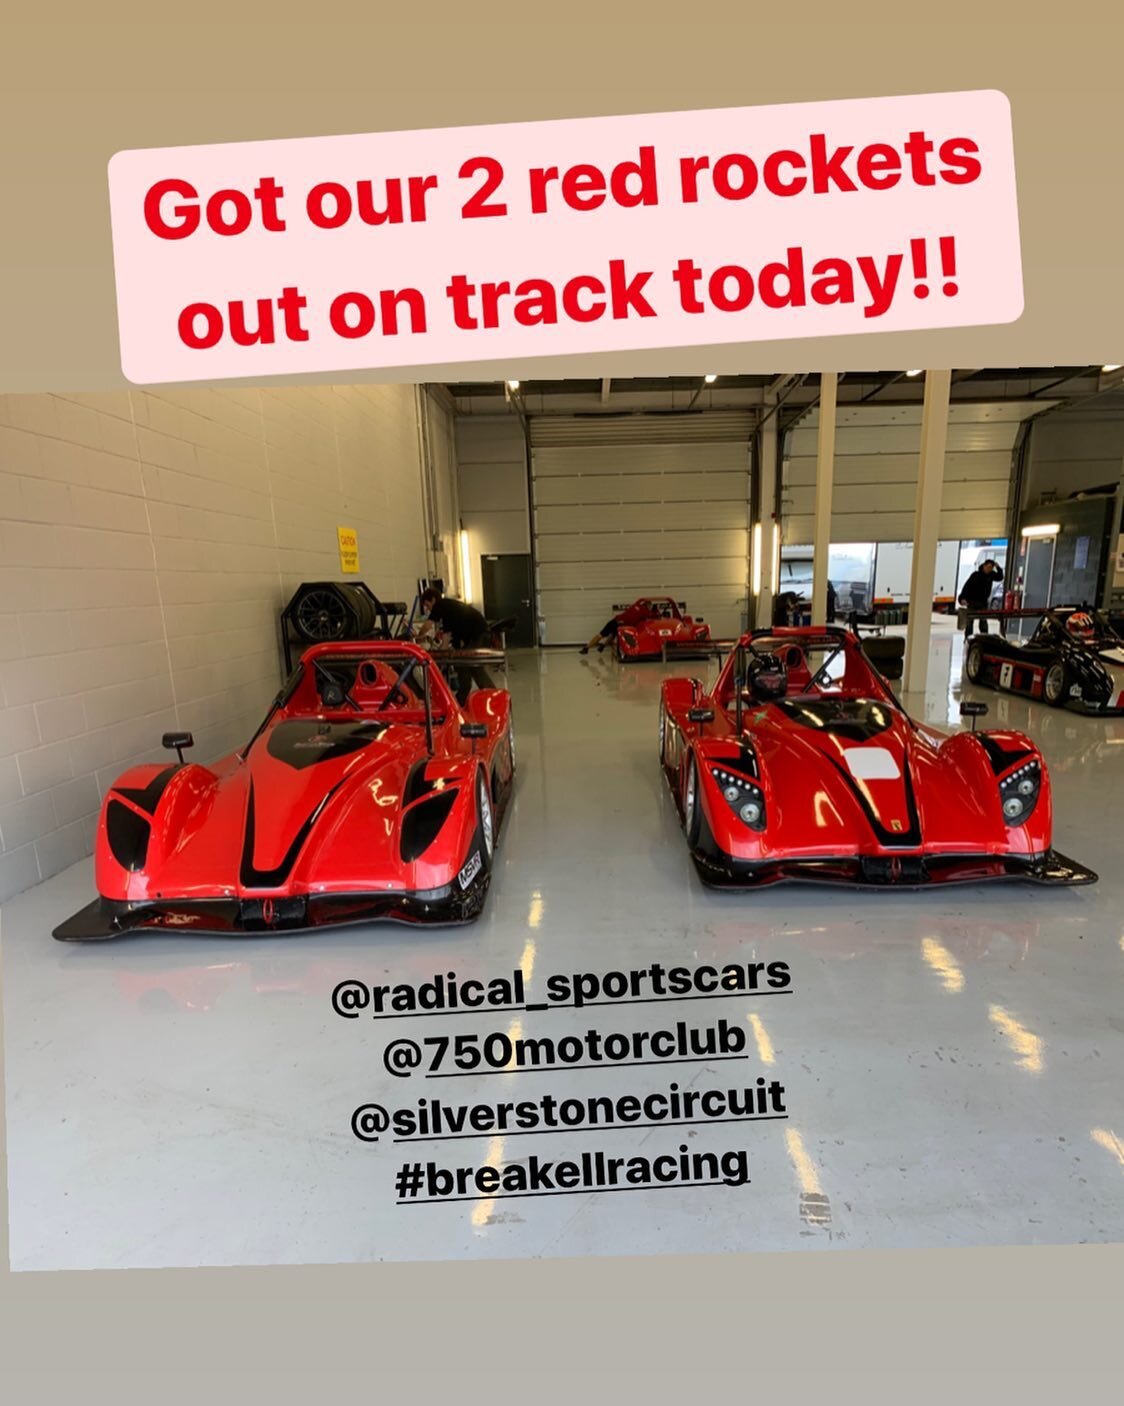 We have our two red Radical SR3&rsquo;s out today @silverstonecircuit 
Fells like an age since we did Some Radicaling so should be fun
😁😁🏎🏎🏎🏎#breakellracing @750motorclub @radical_sportscars